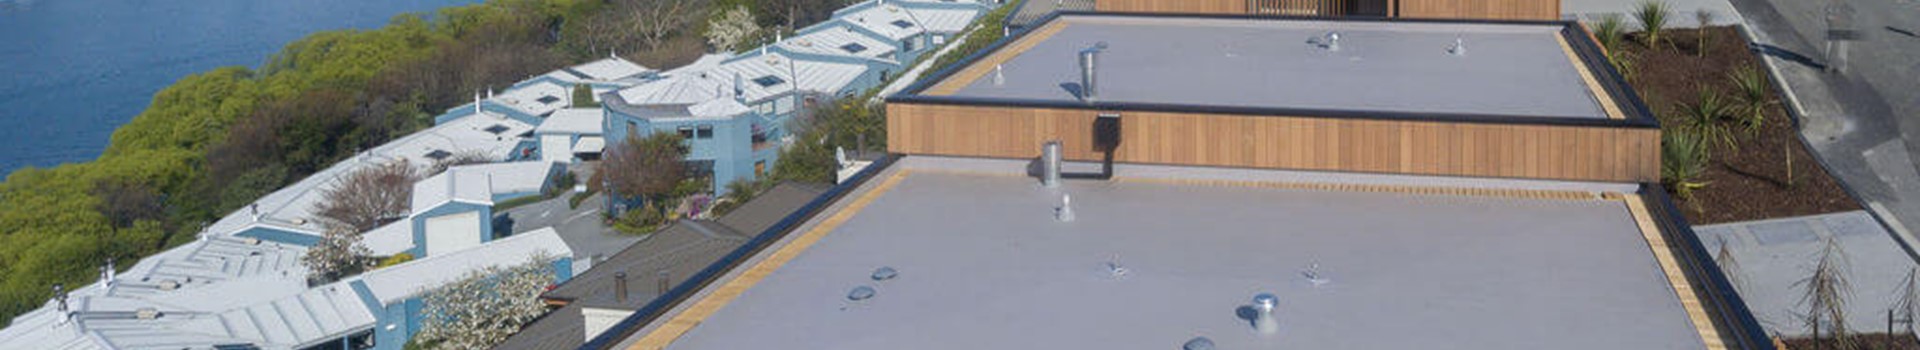 WarmRoof - insulating a building from the outside